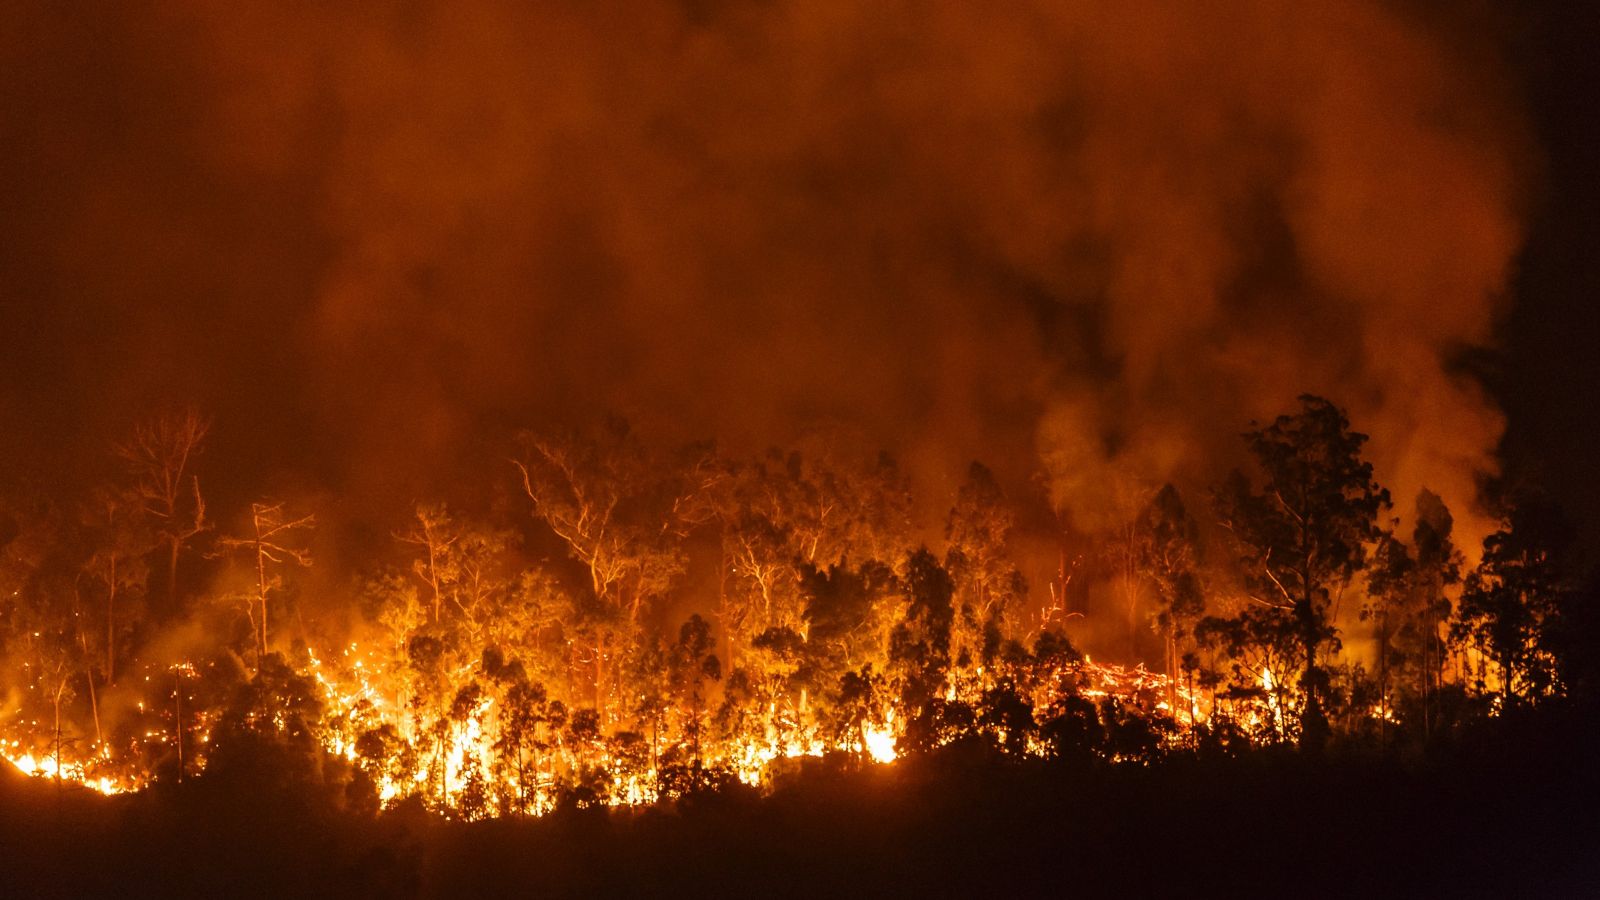 Big bushfire at night burning multiple trees in a forest